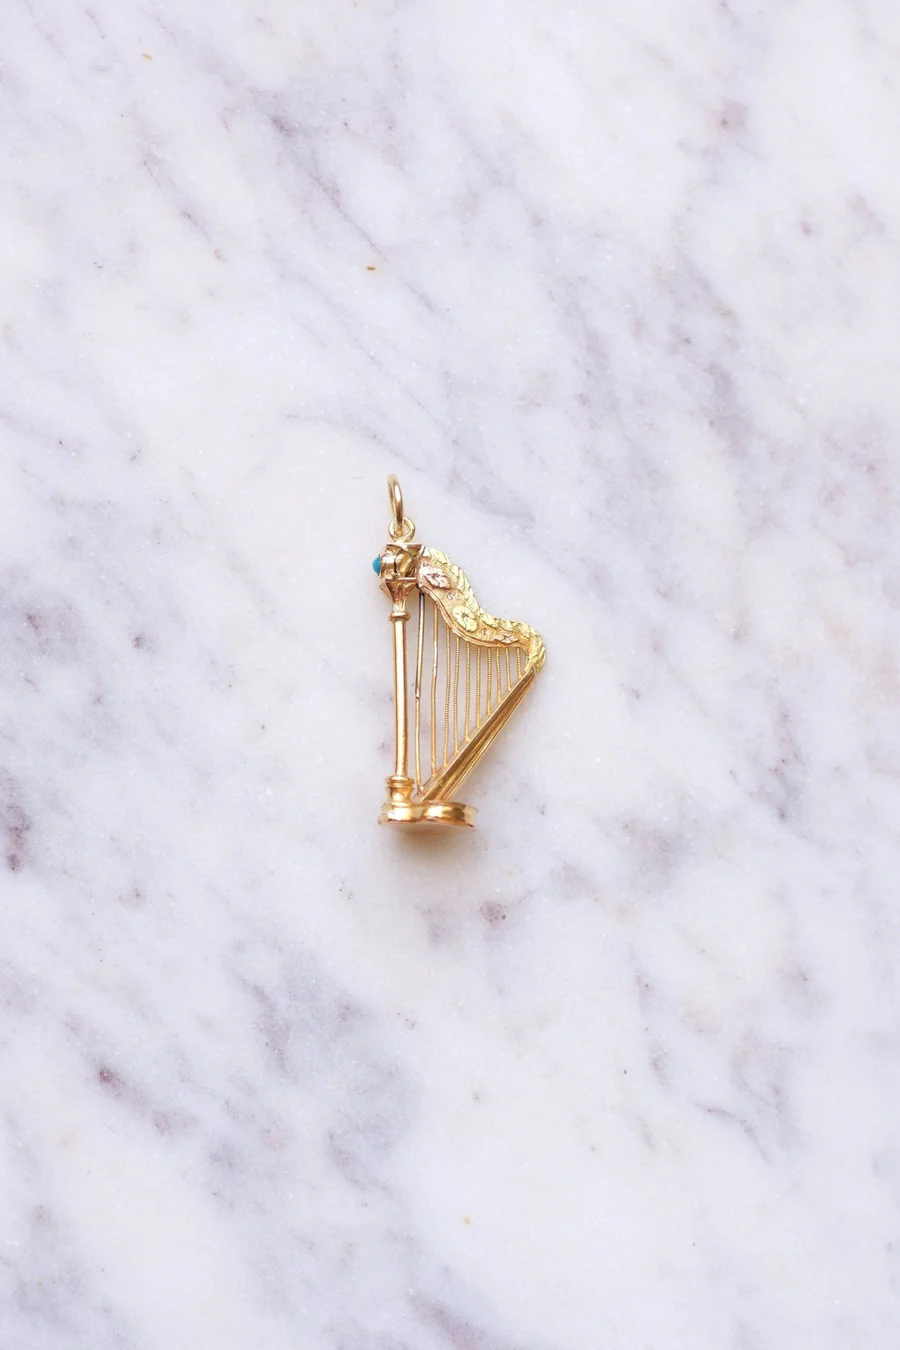 Yellow gold and turquoise Victorian harp pendant with secret compartment - Galerie Pénélope